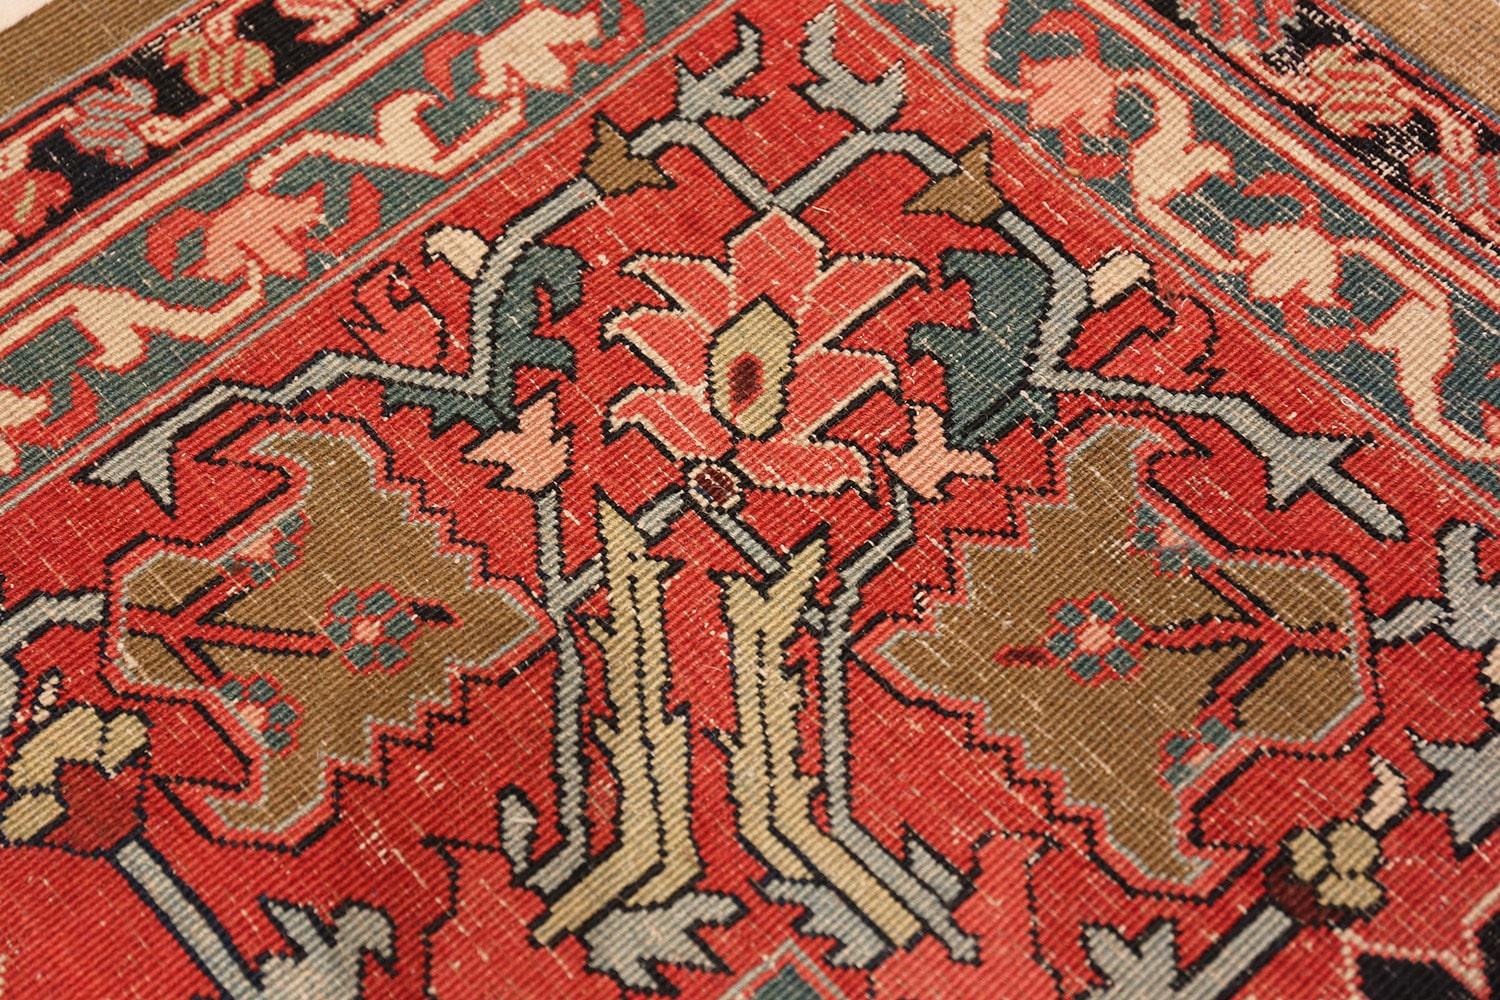 Spectacular and unusually fine weave large size with jewel tone colors antique Persian Heriz Serapi rug, country of origin / rug type: Antique Persian rugs, date: circa 1900. Size: 12 ft 6 in x 17 ft 6 in (3.81 m x 5.33 m)

The magnificent jewel